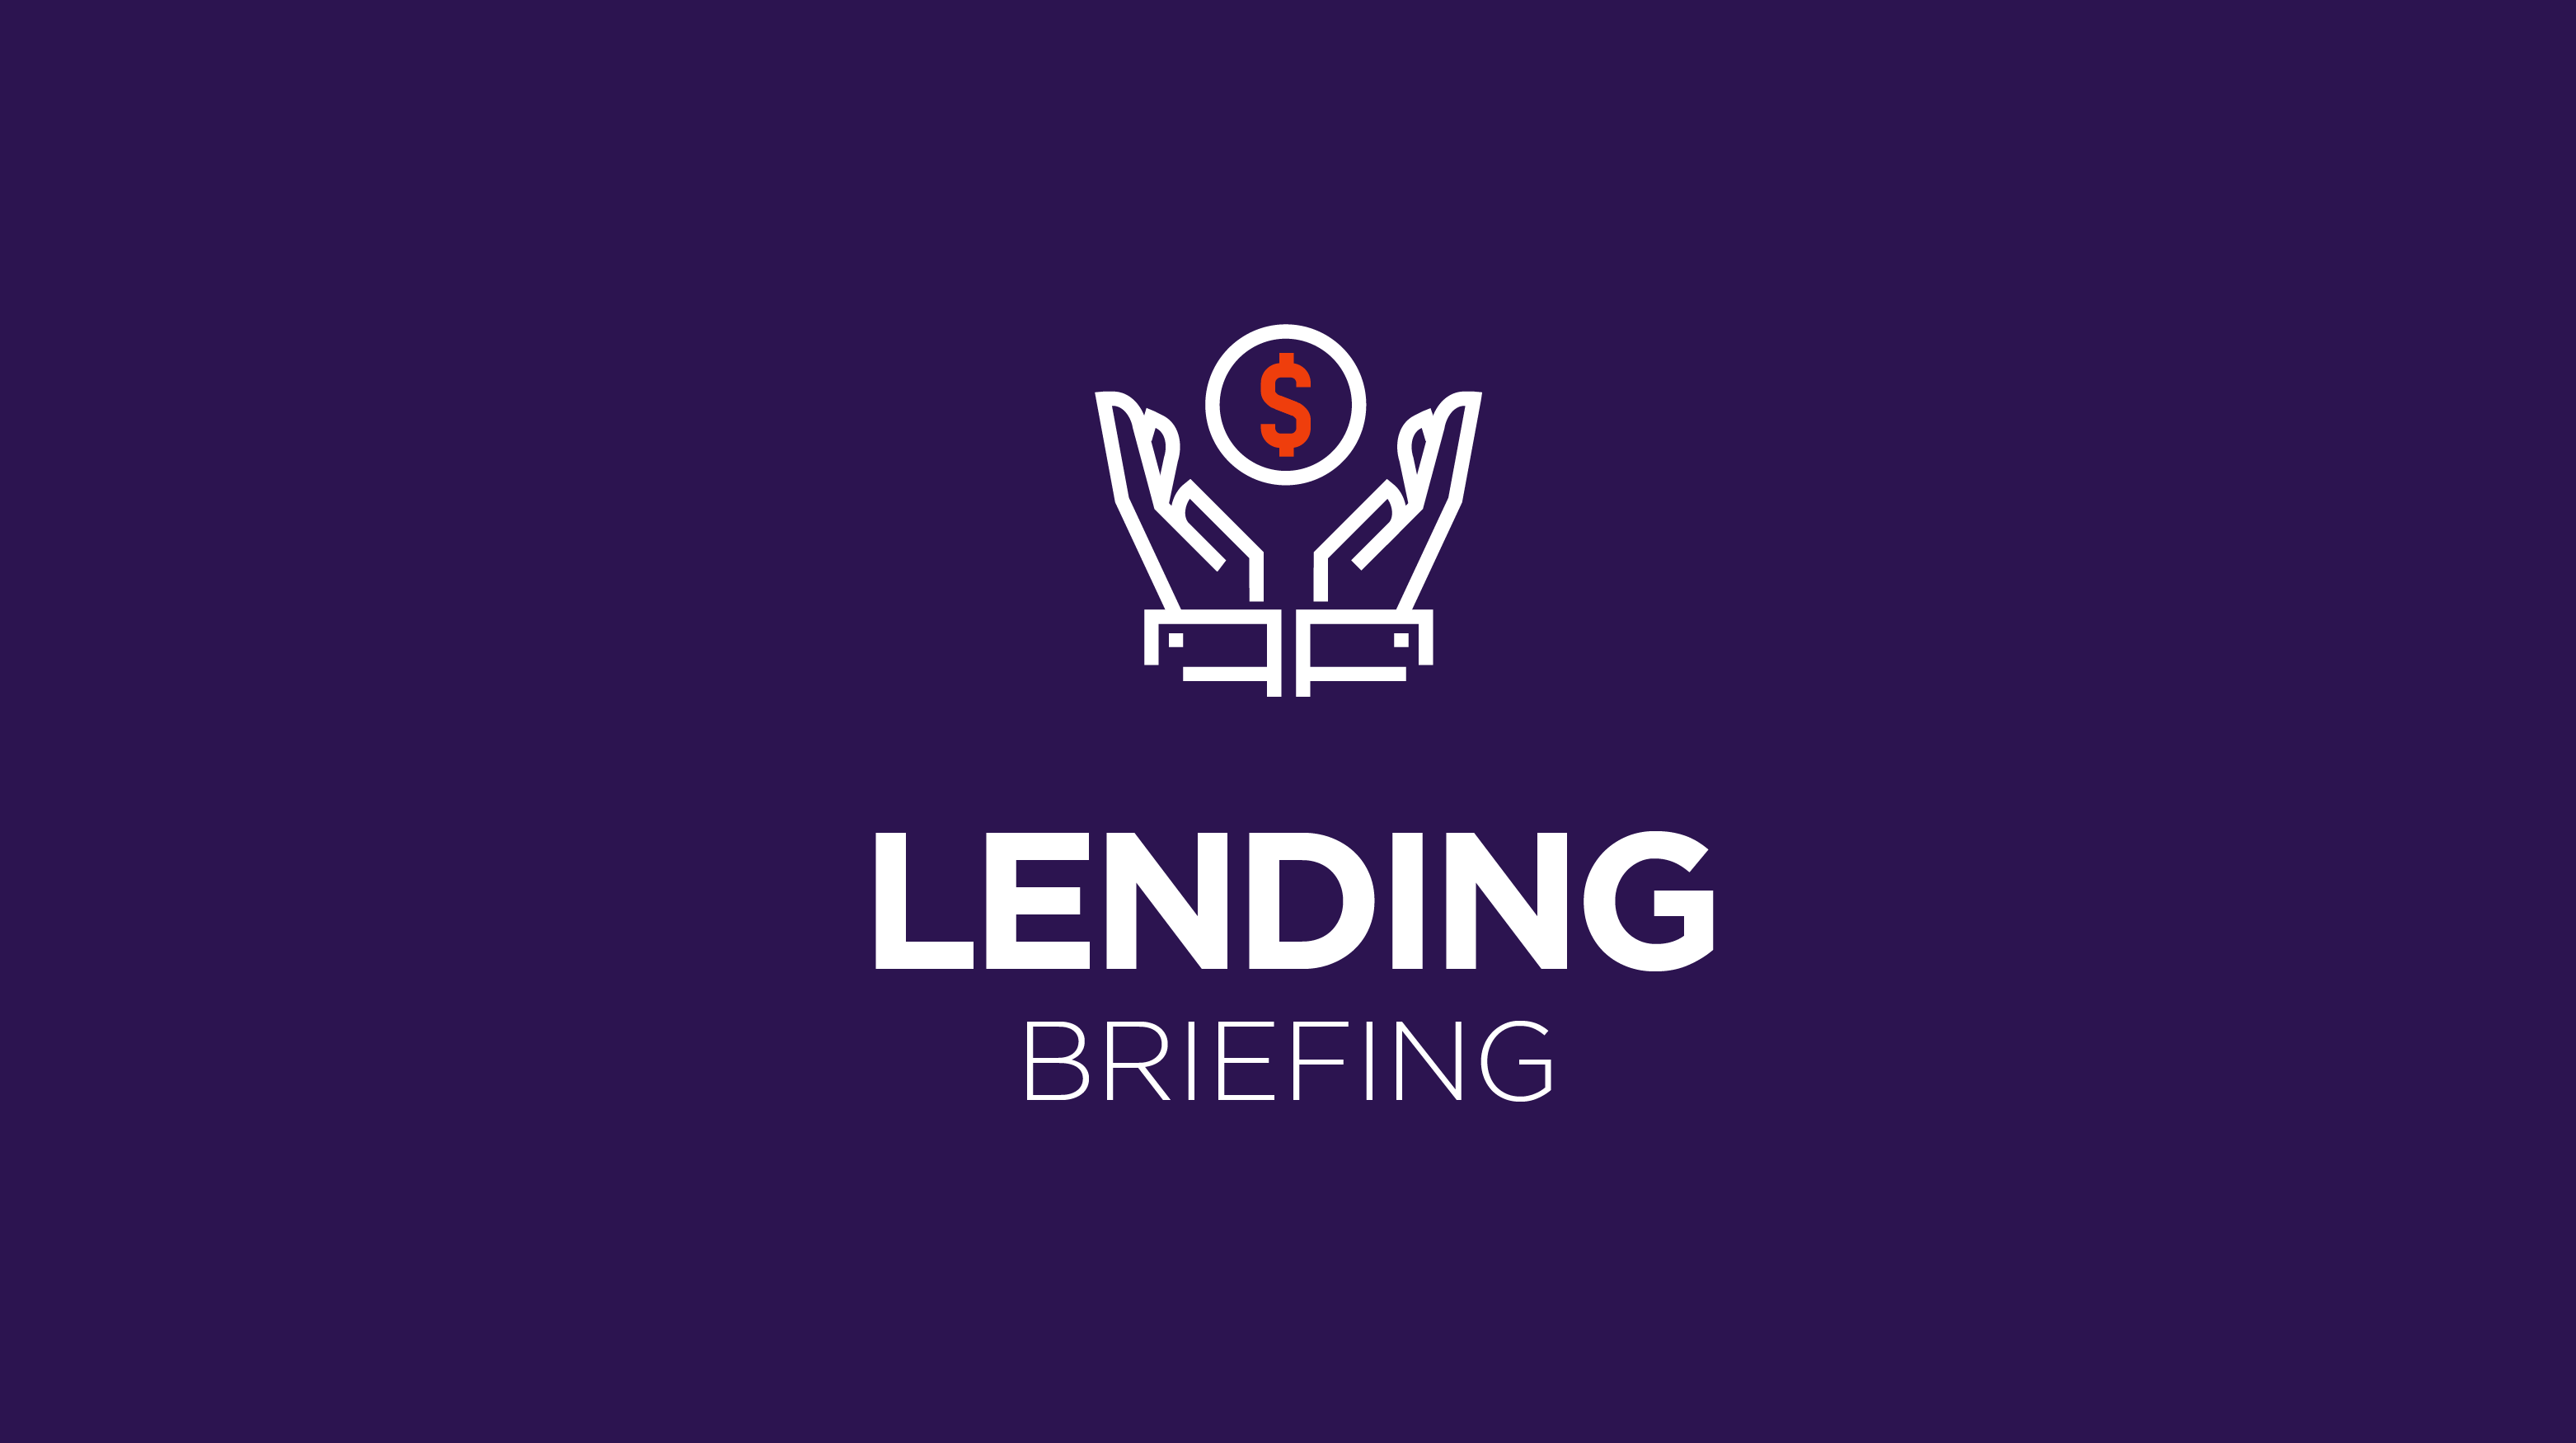 Lending Briefing: There is a recession coming but don’t worry, it’s not 2008 all over again